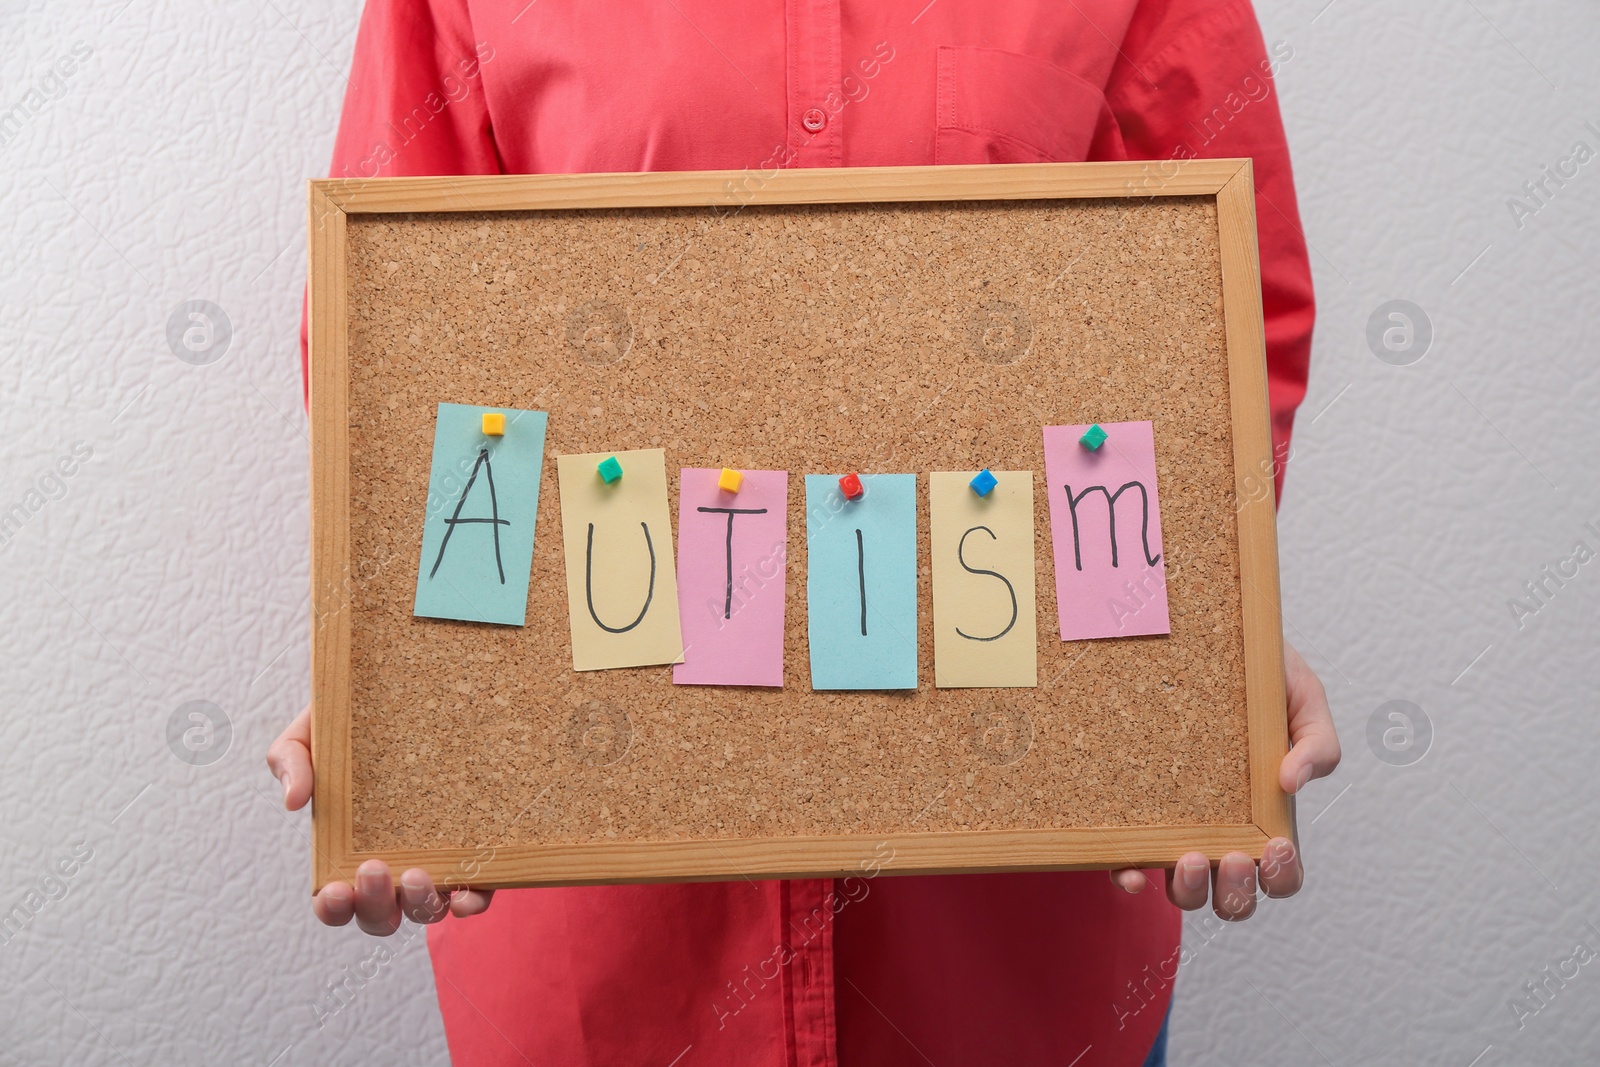 Photo of Woman holding board with word "Autism" on light background